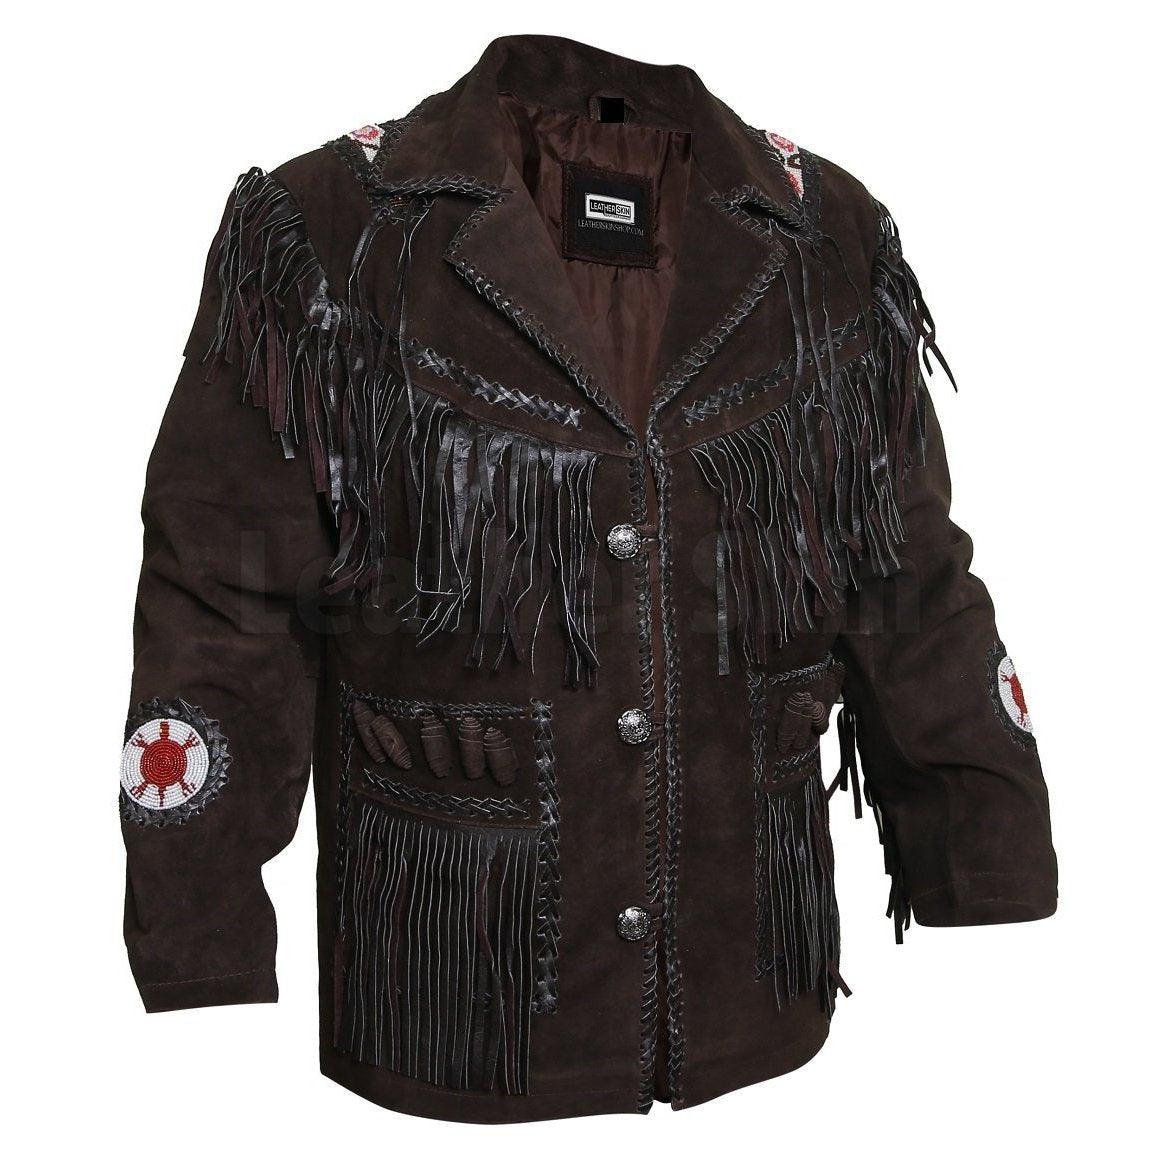 Edgy Chocolate Brown Leather Jacket with Fringes - Leather Loom